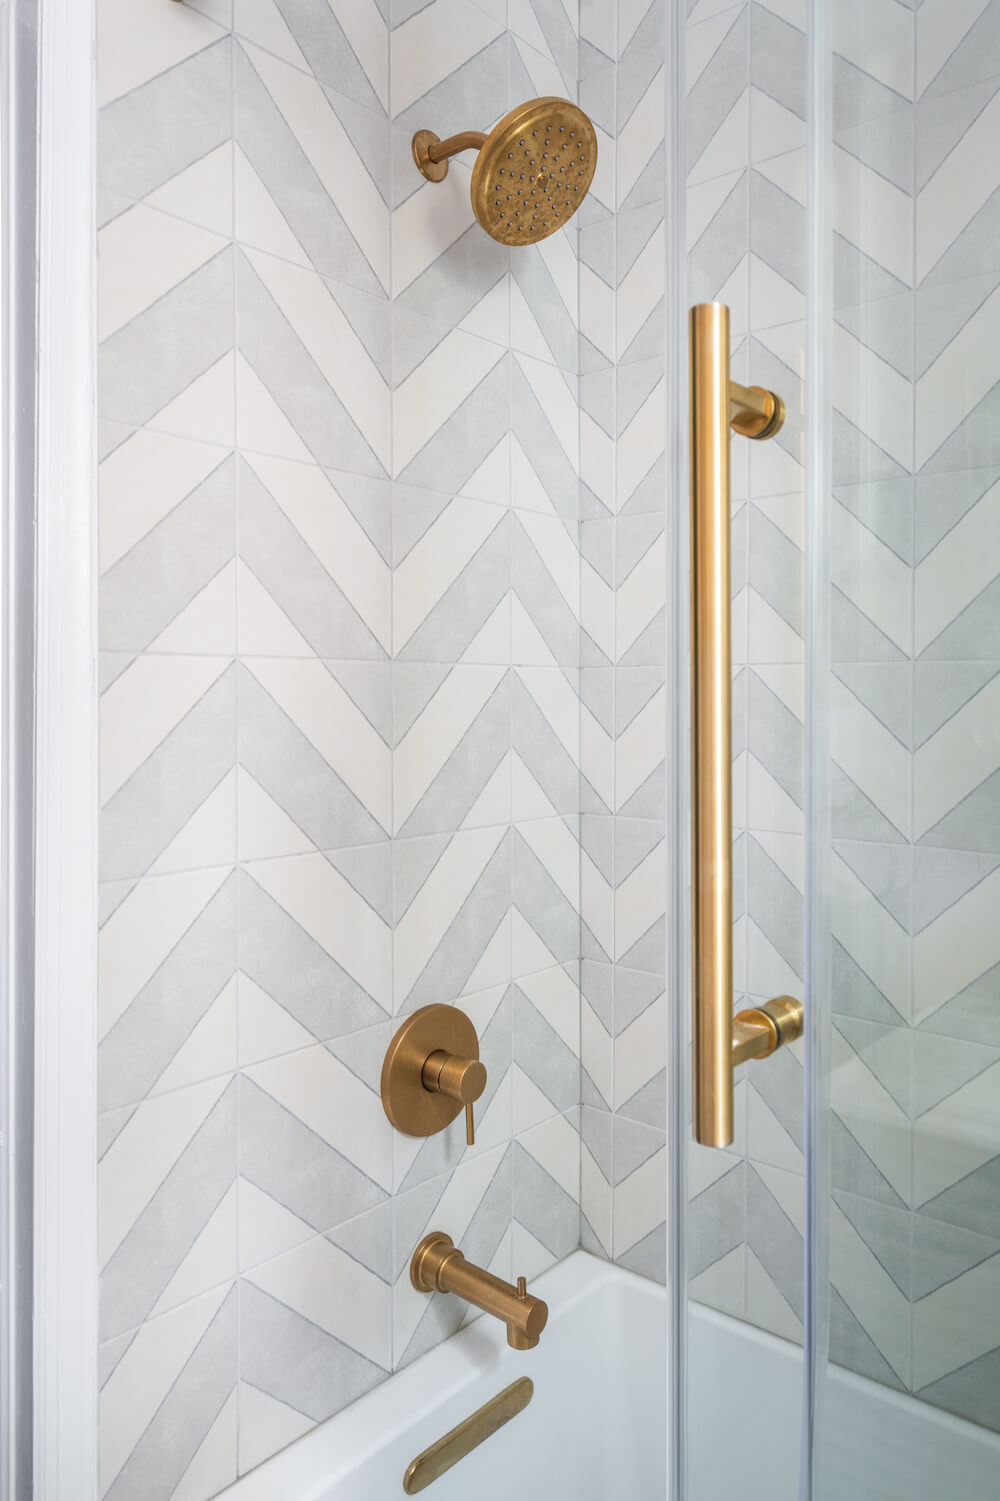 Shower with chevron tiling and bronze hardware